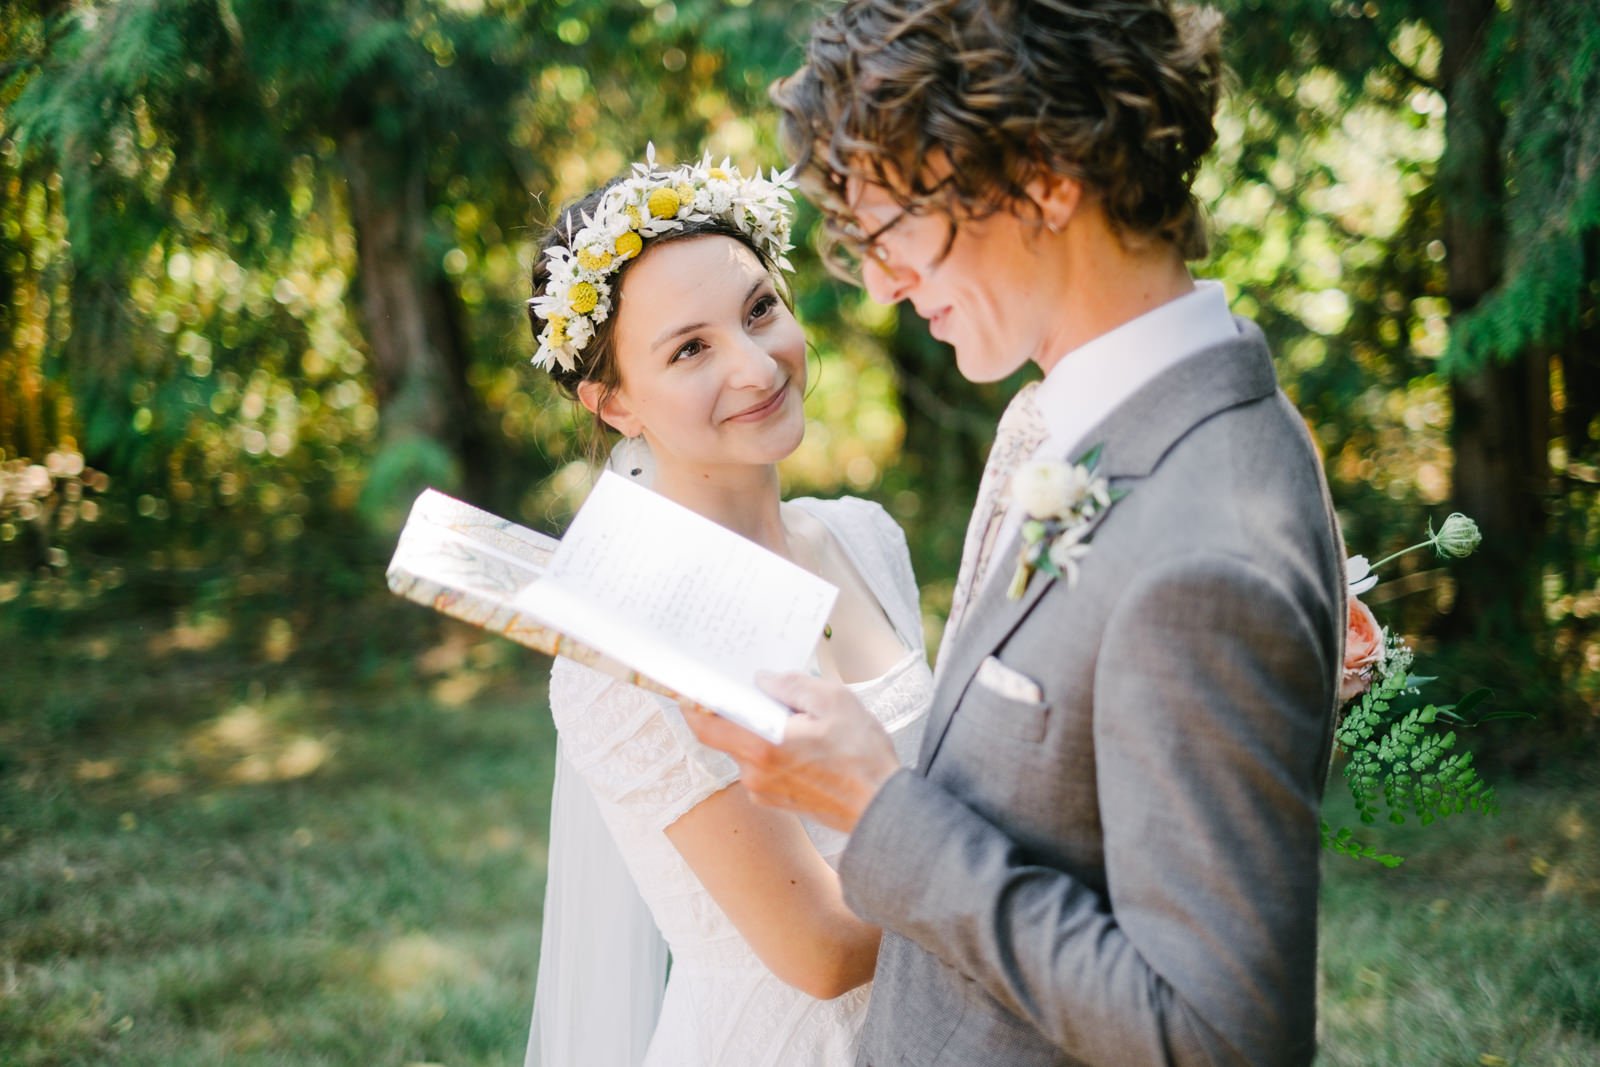  Bride smiles at groom who is reading her gift letter and wrapped package 